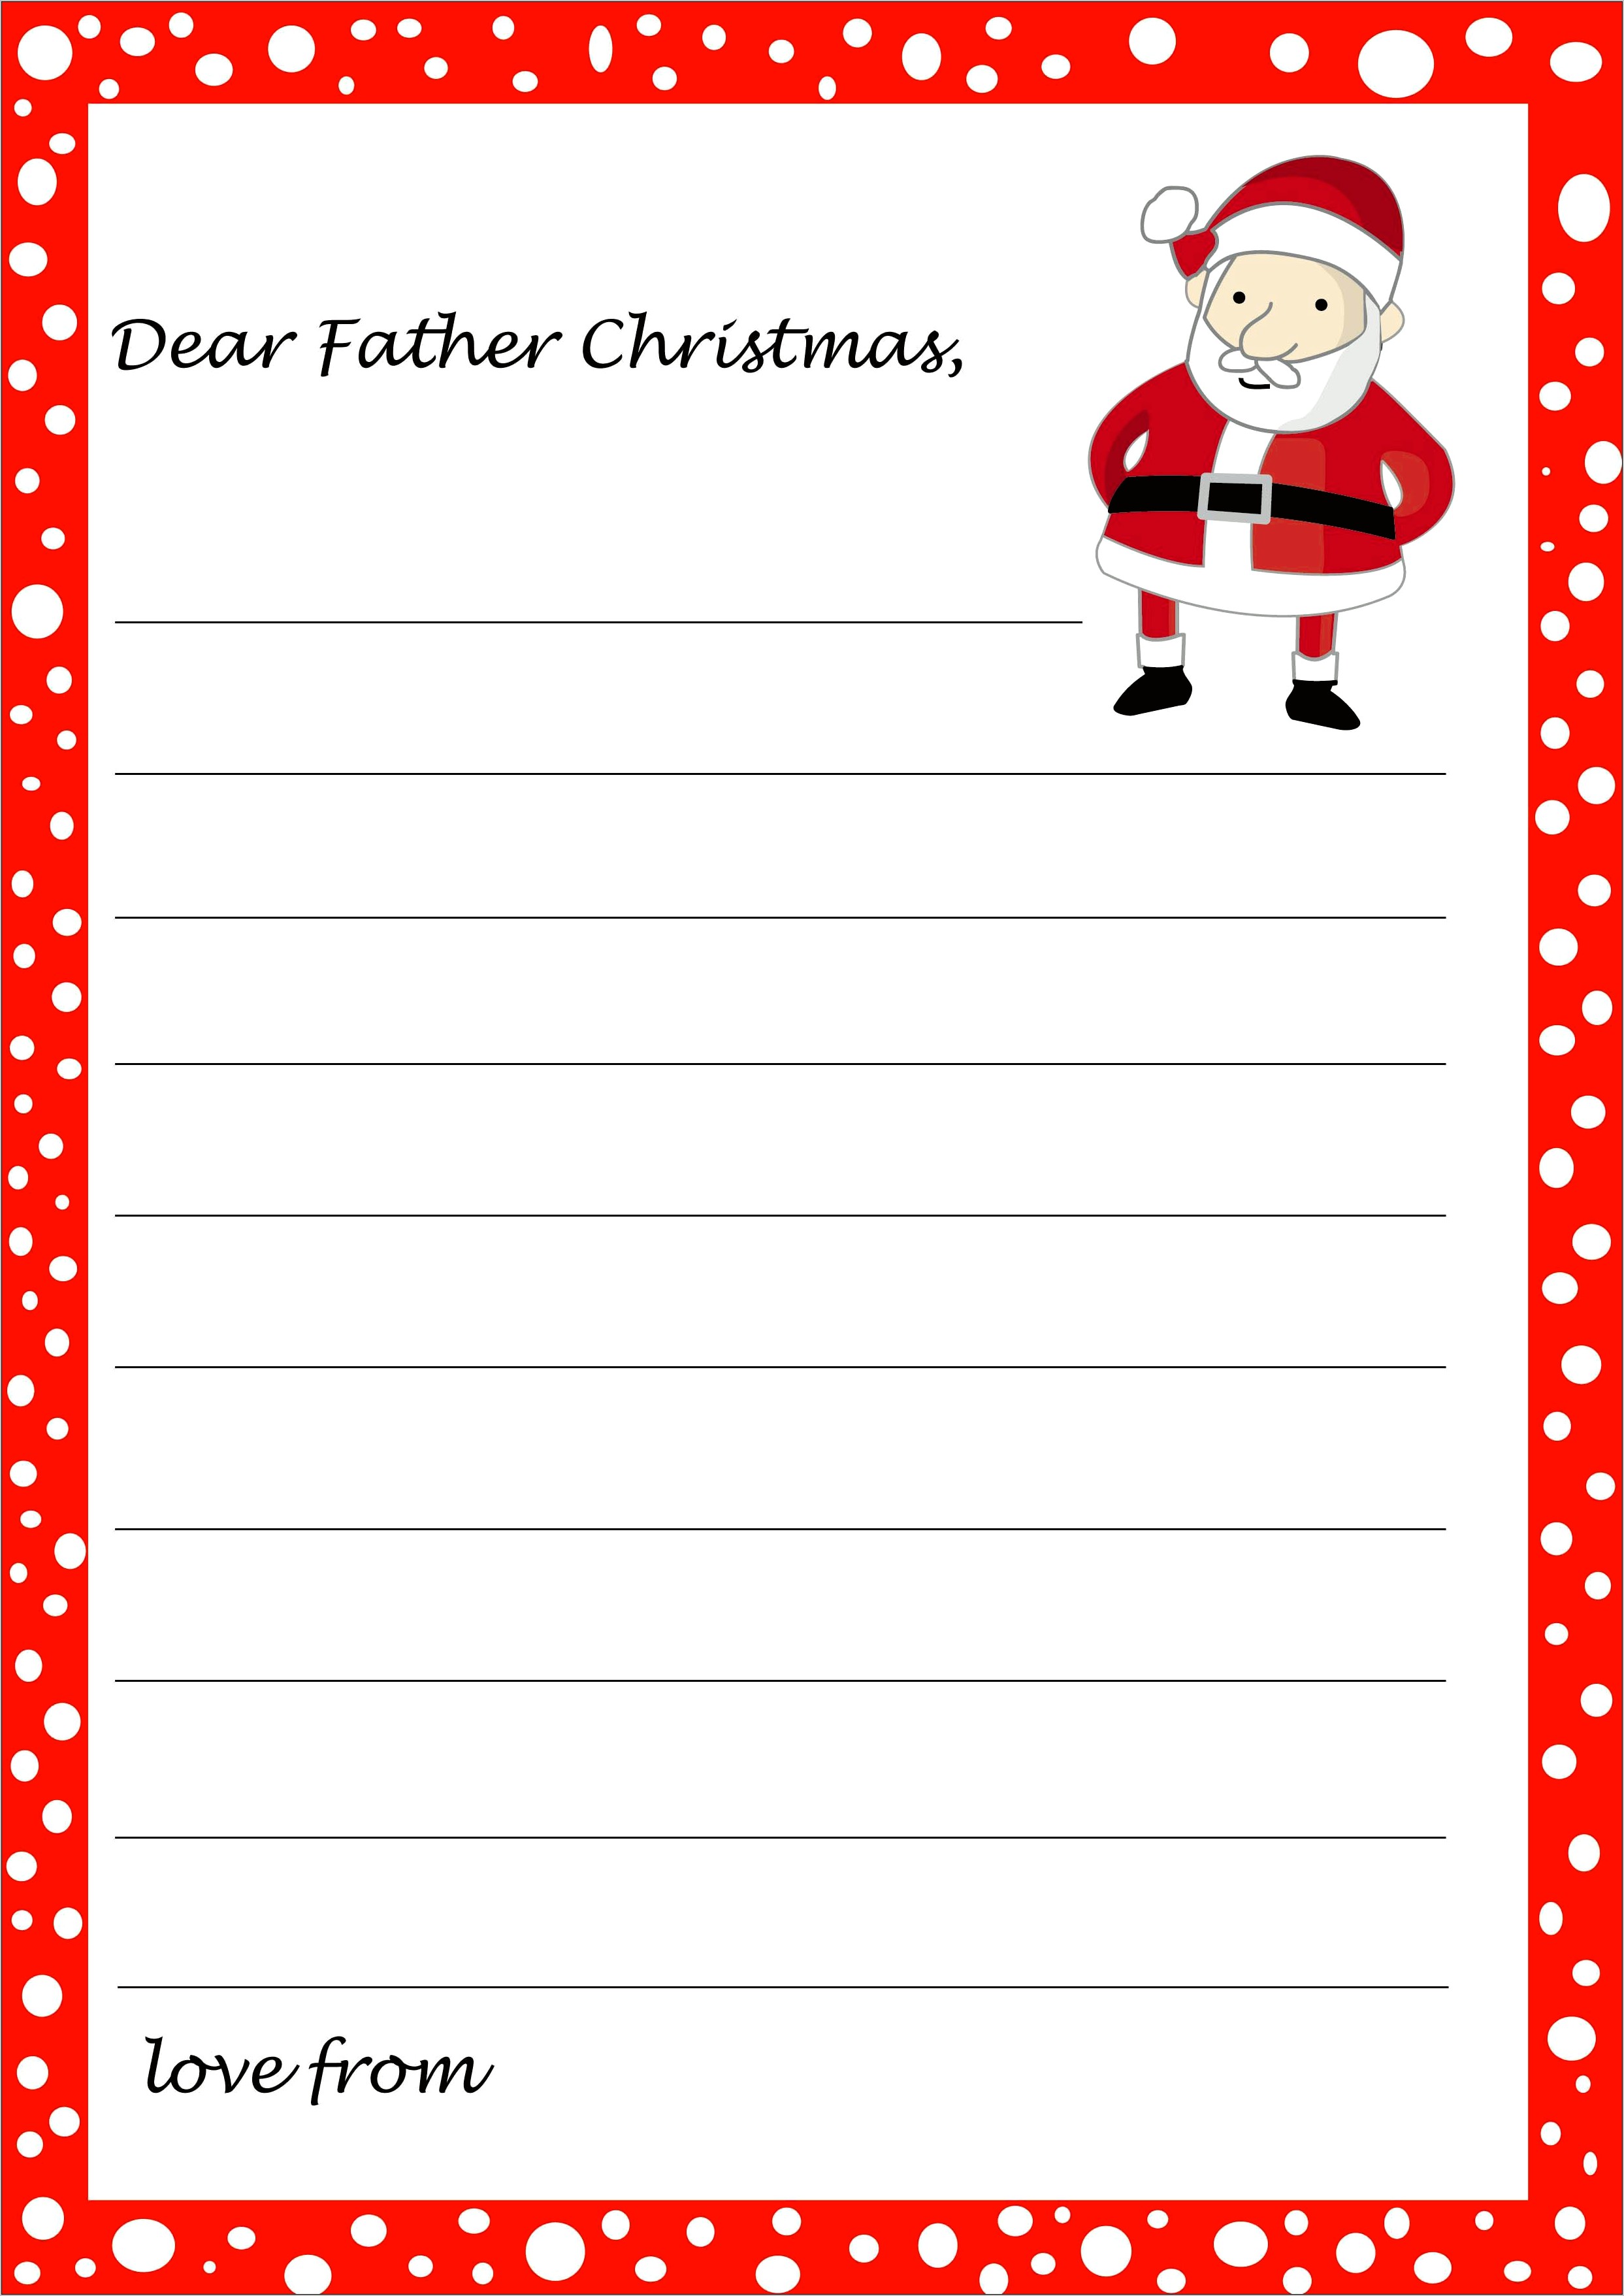 Free Christmas Letter Templates To Print